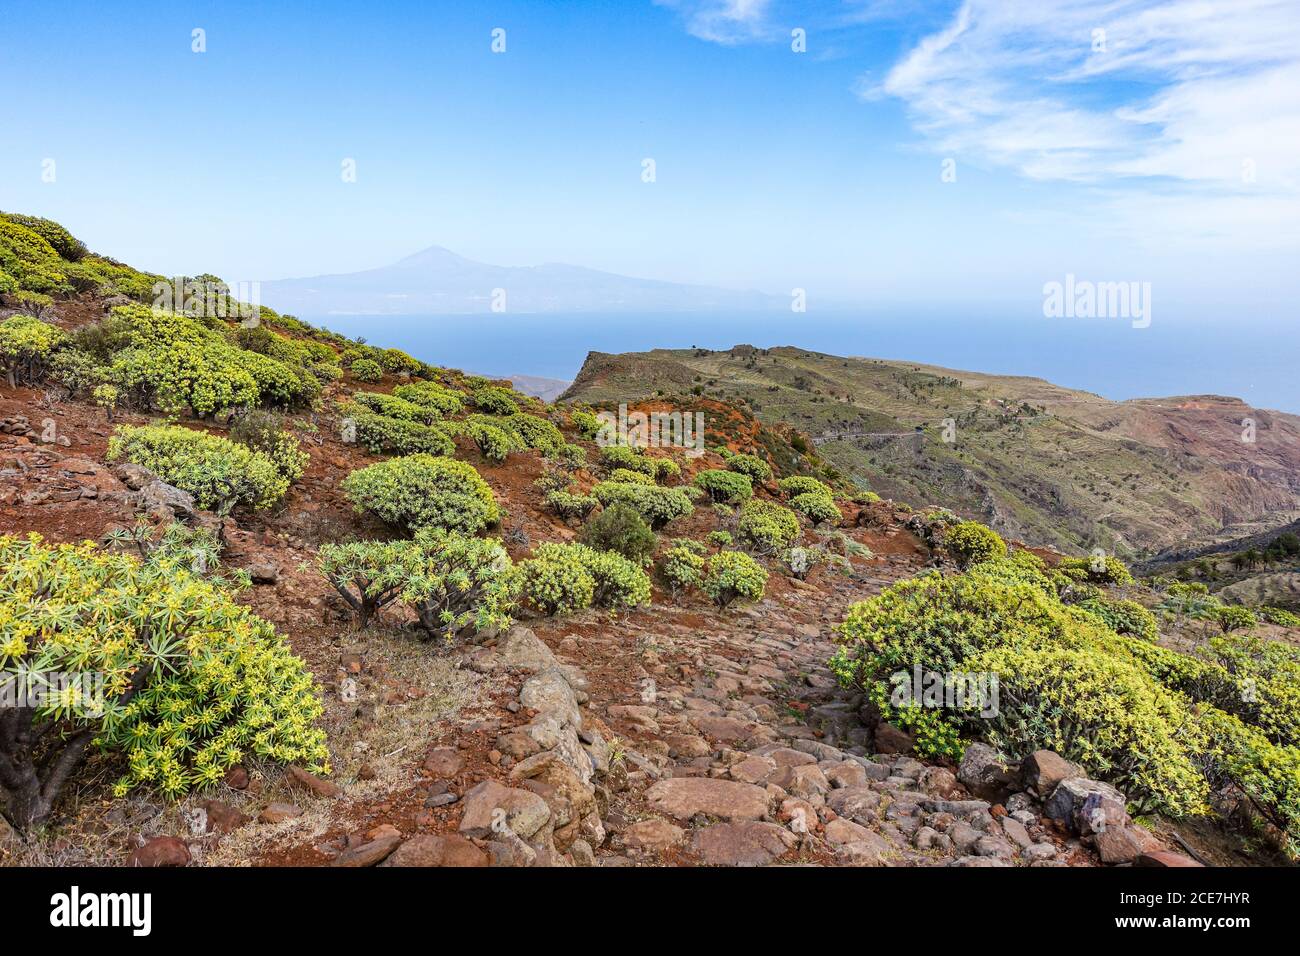 Landscape on La Gomera with flowering spurge plants and view of Tenerife Stock Photo